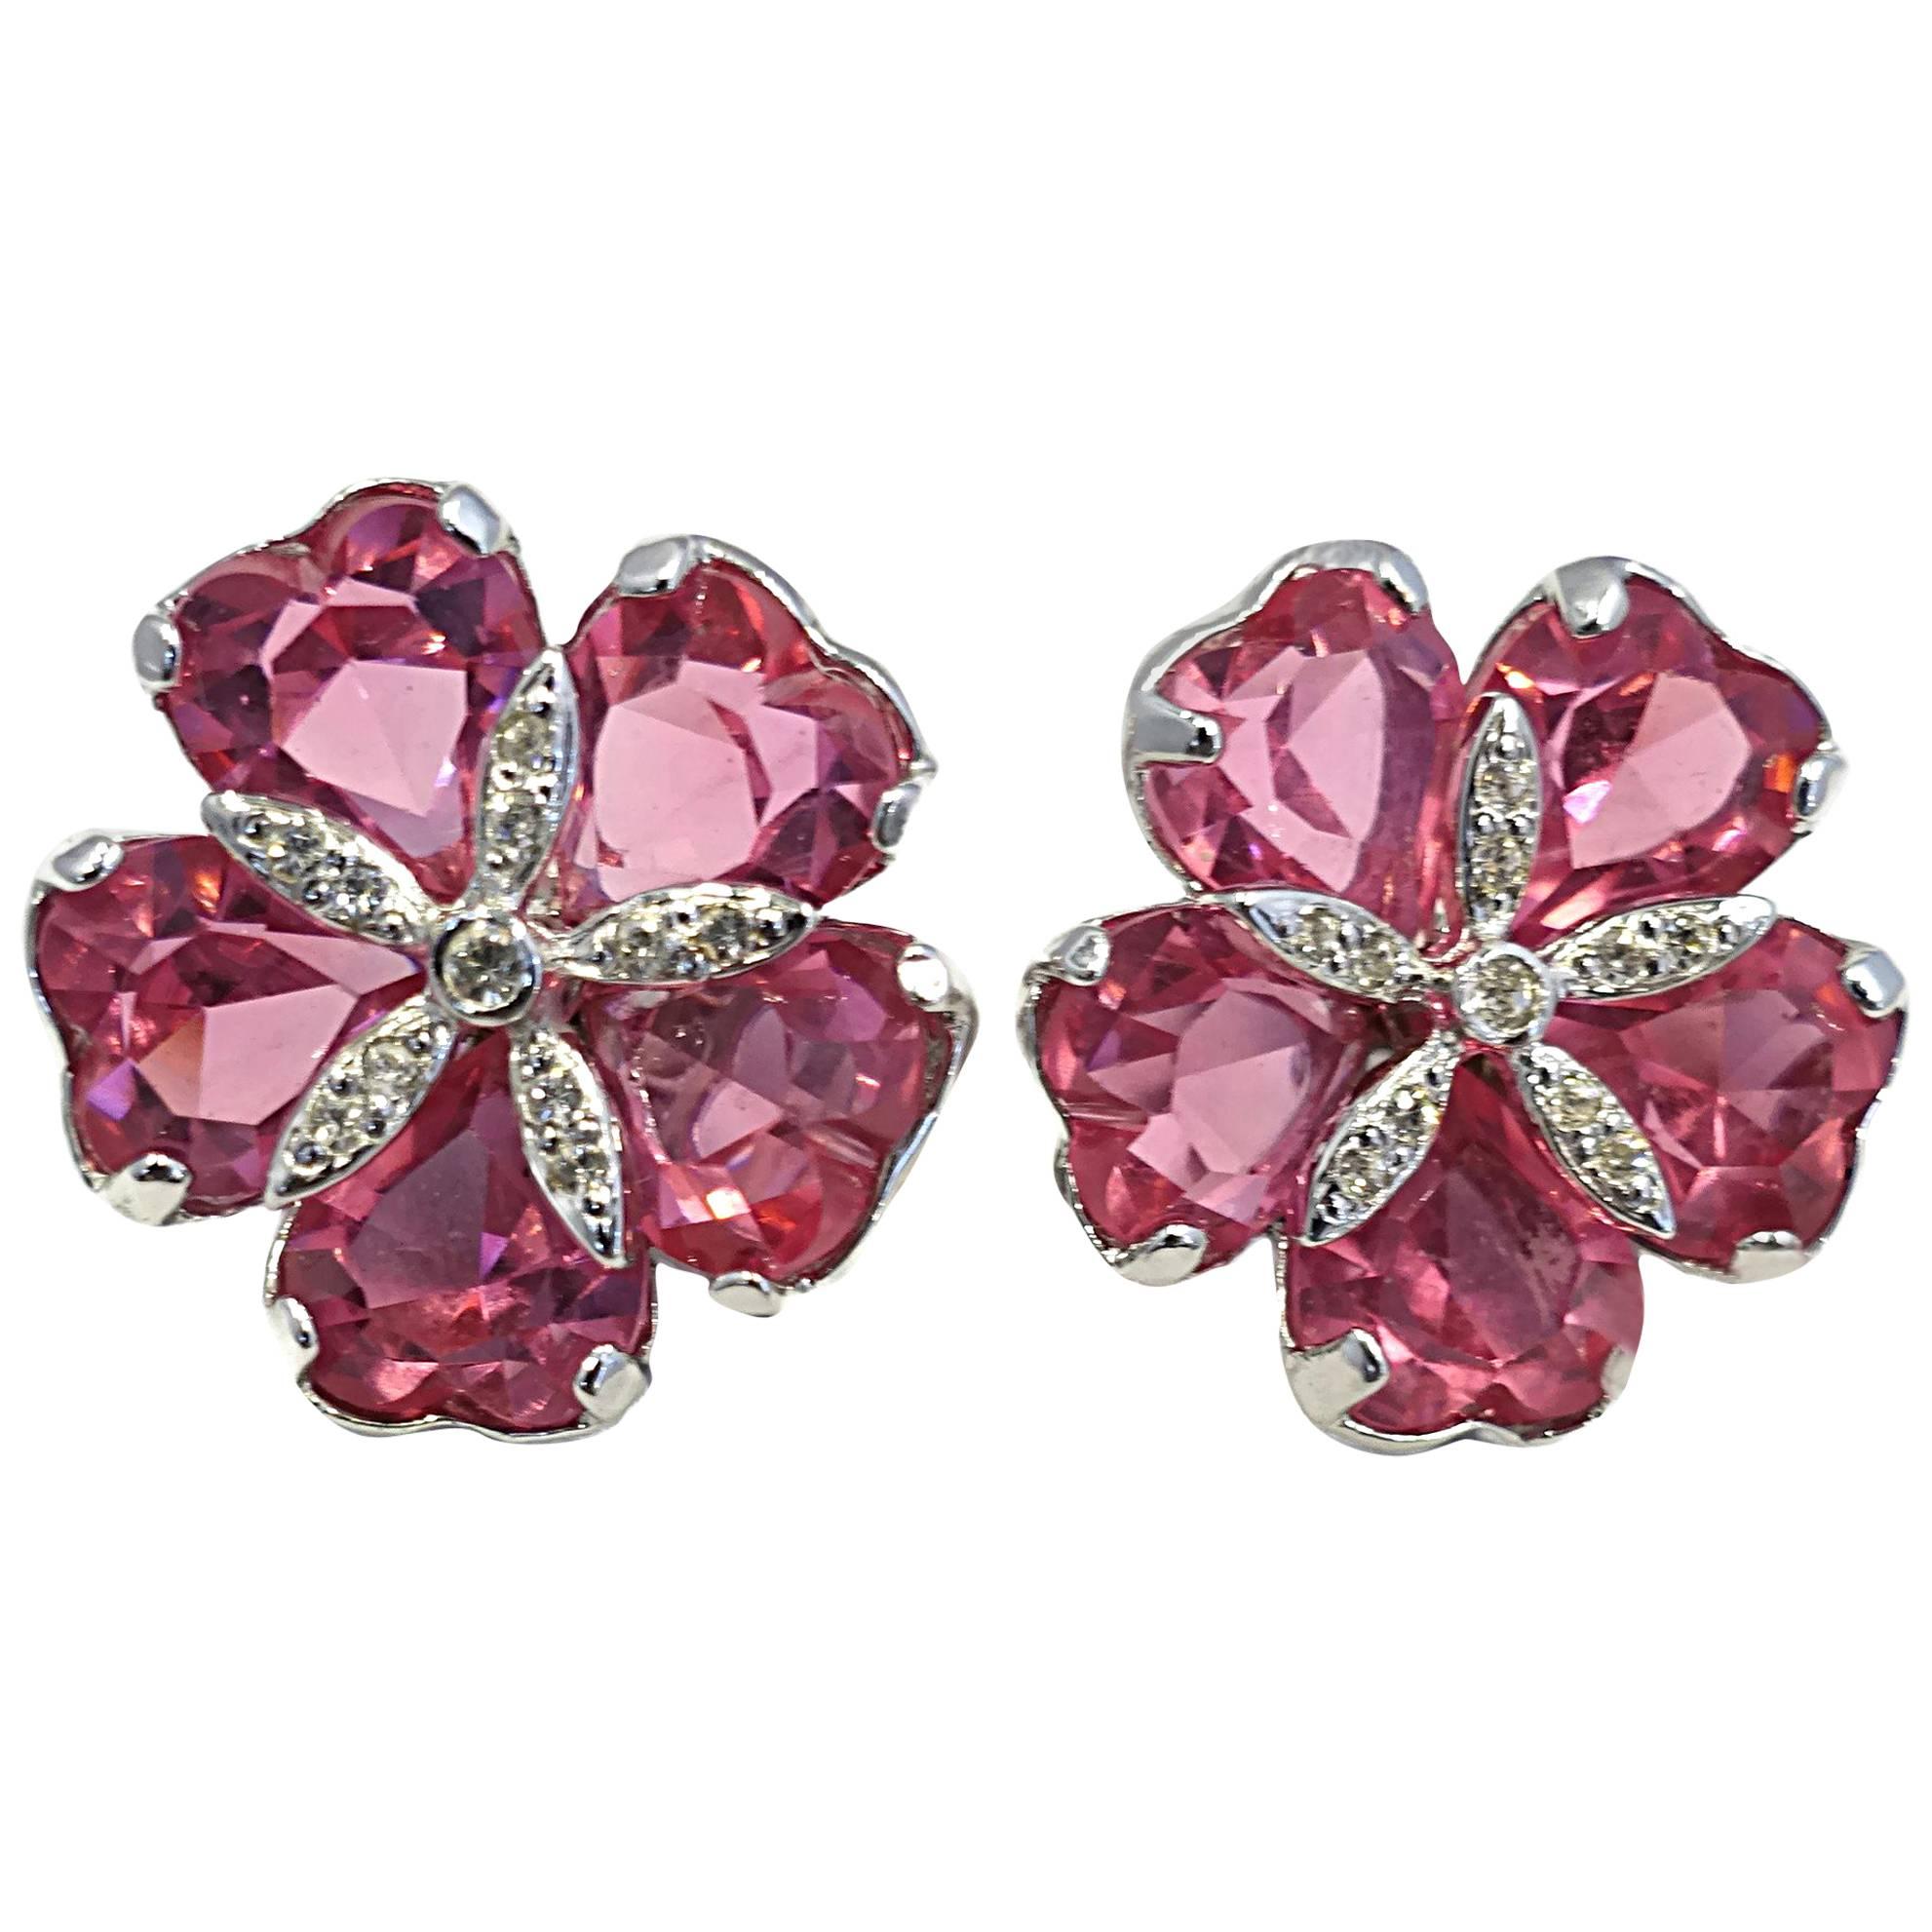 Signed Replica Italy Hot Pink & Clear Crystal Floral Earrings